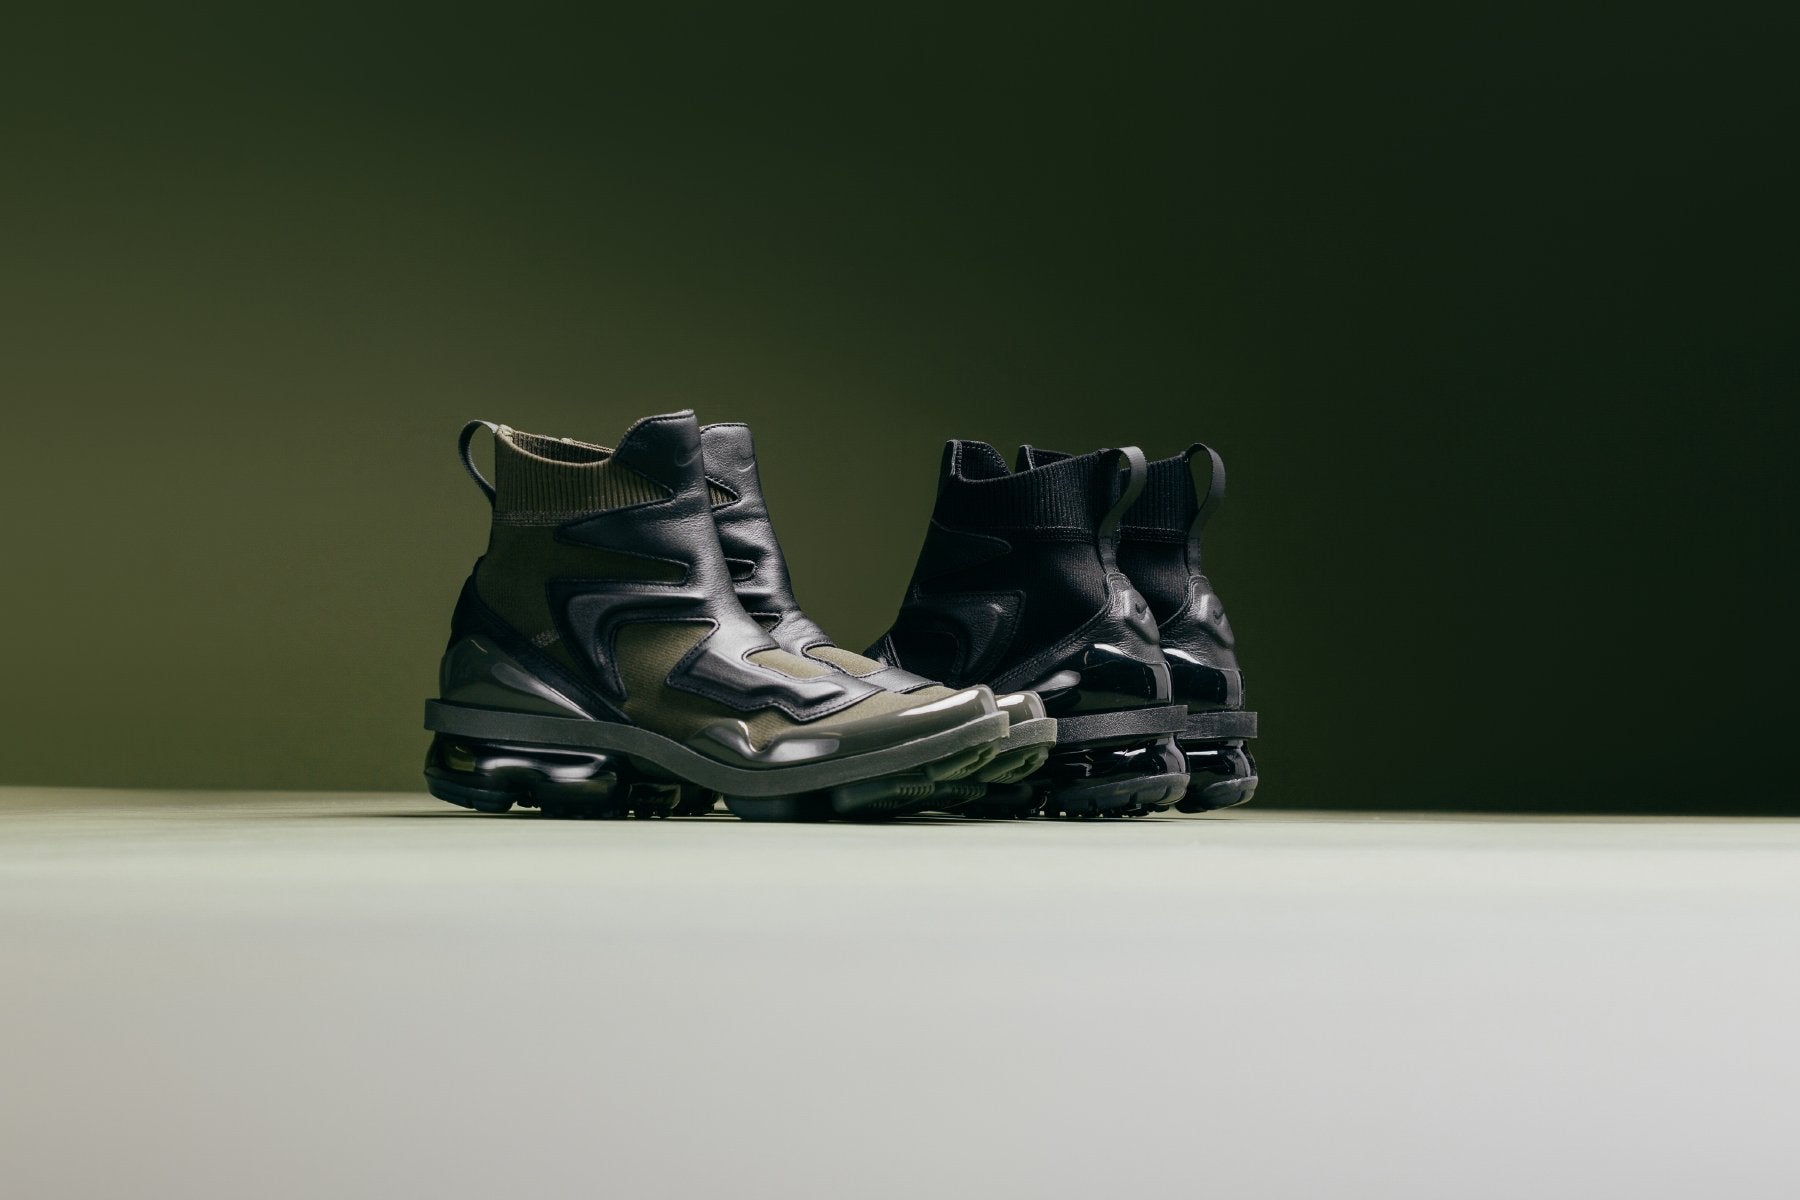 Nike Women's VaporMax Light II Available Now – Feature